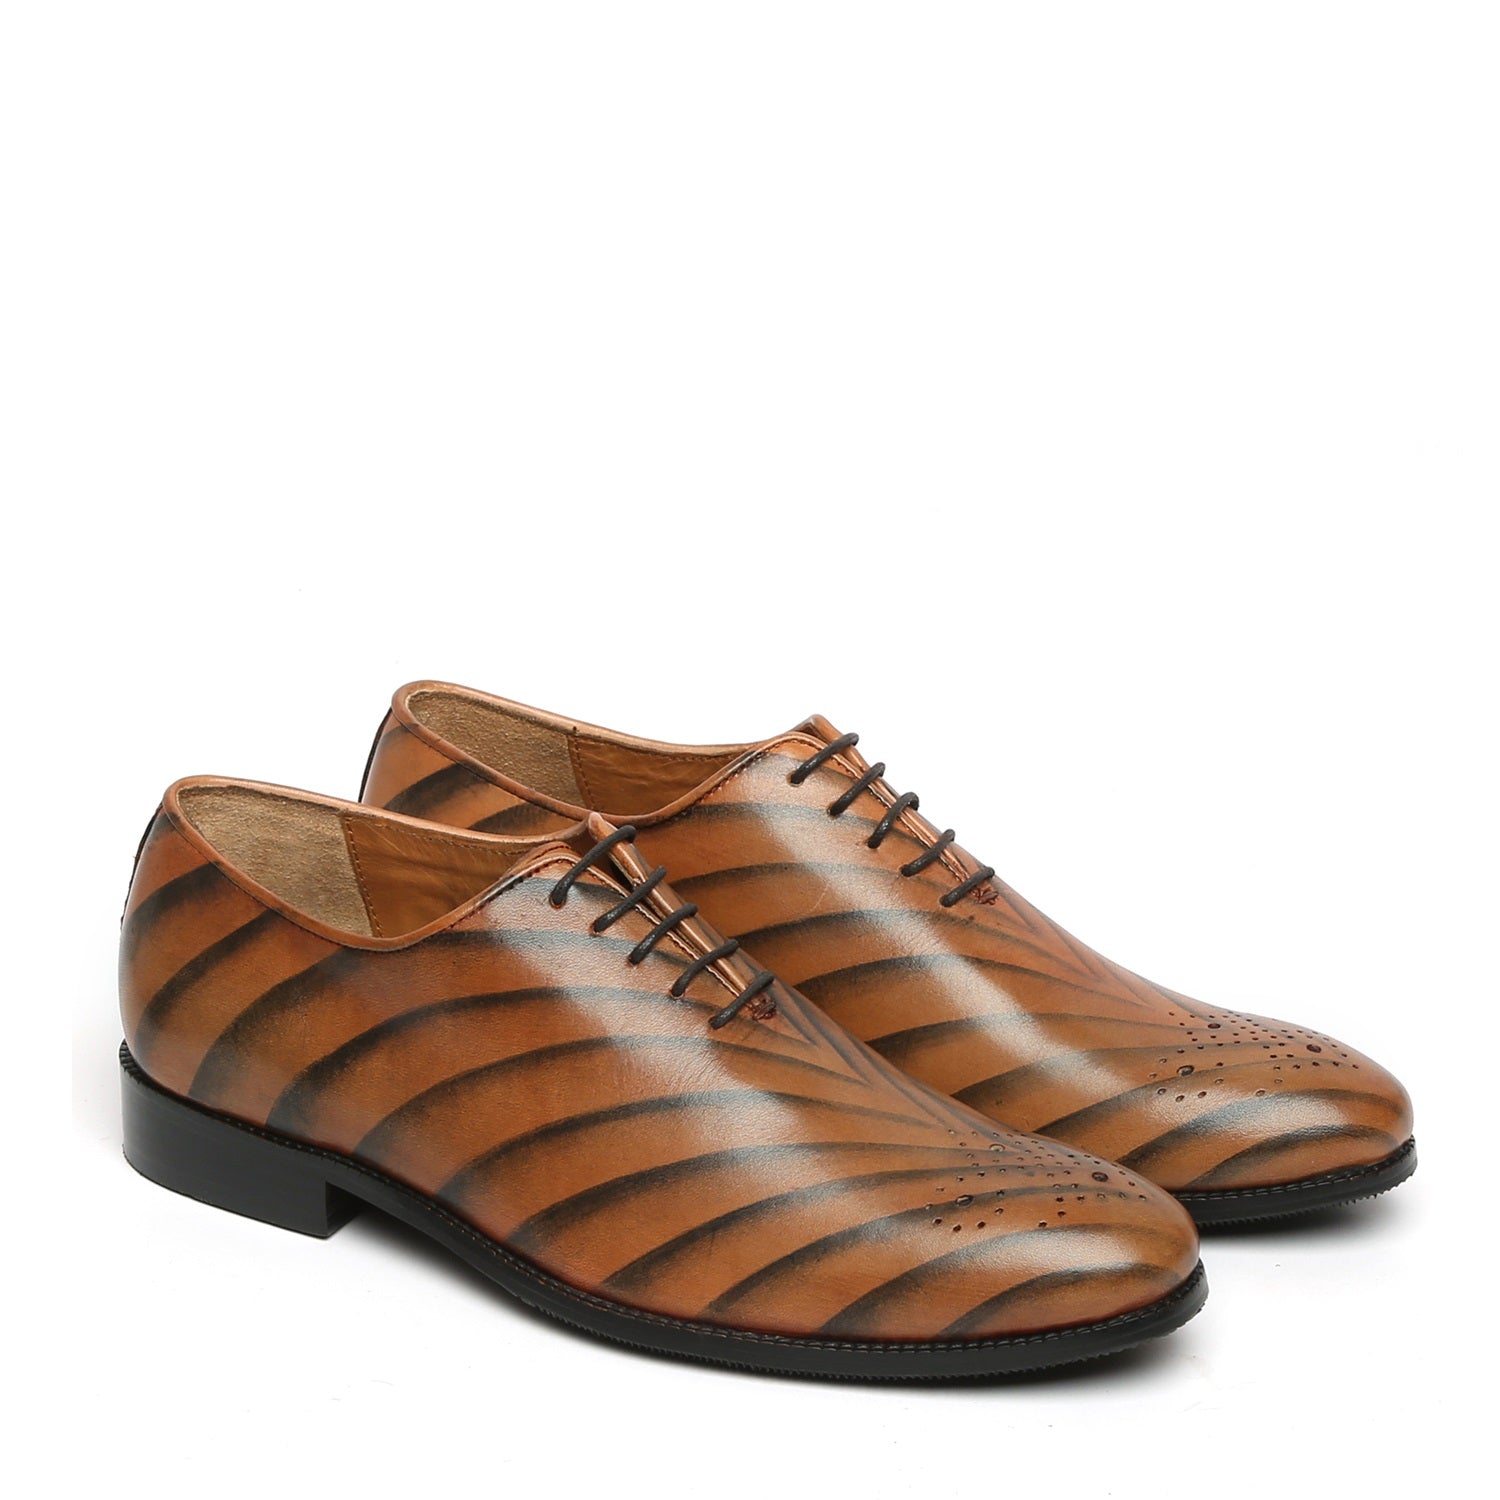 Tiger Print Tan Single Piece Leather Oxford Lace-Up Formal Shoe